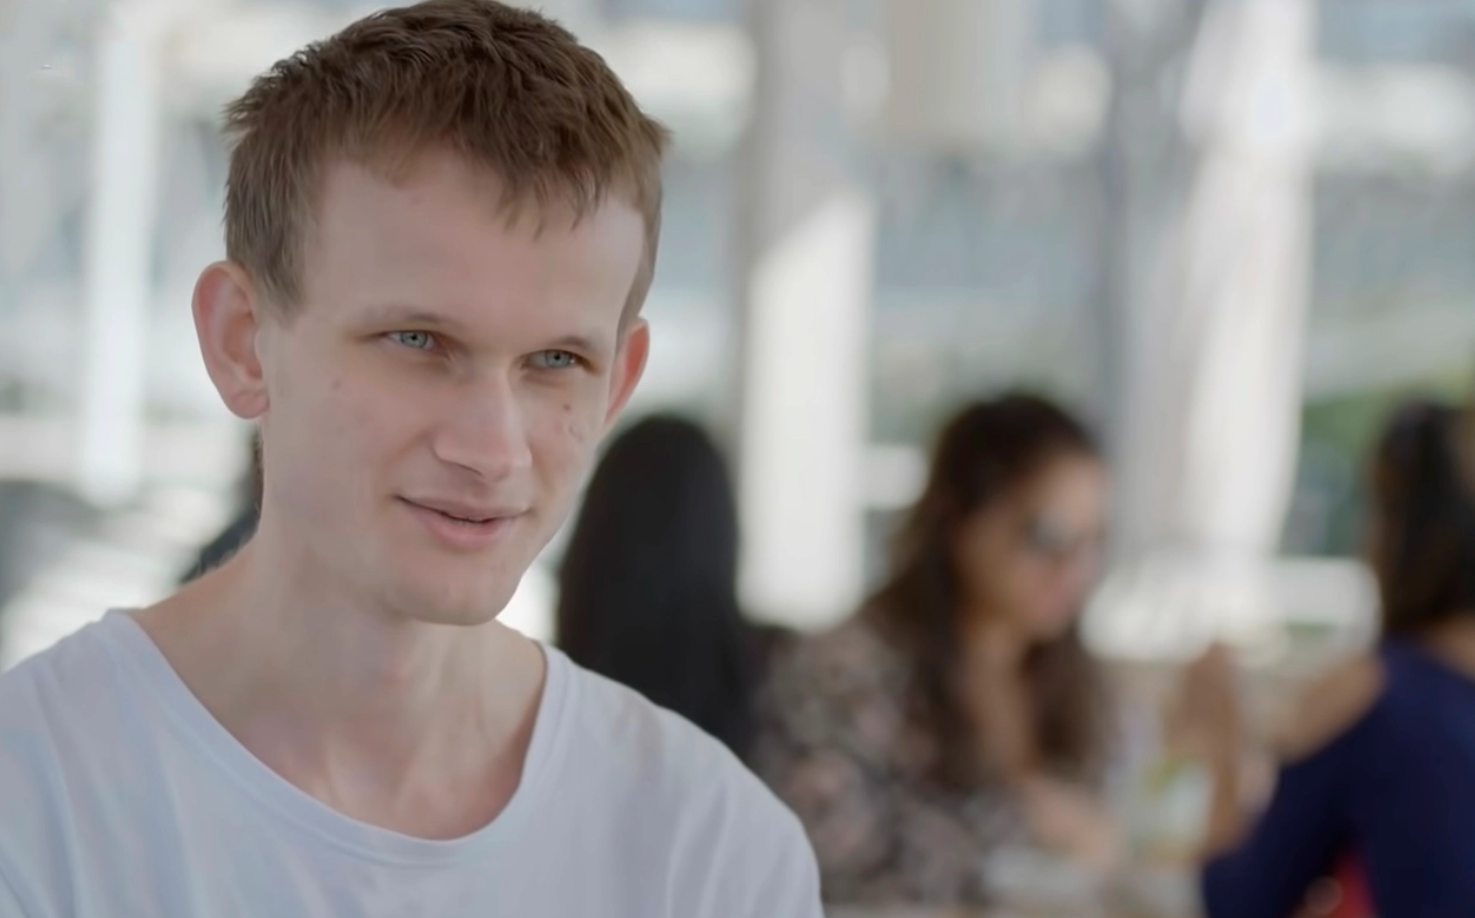 "Bare-Faced Lie": Ethereum's Vitalik Buterin Hits Back at Proof-of-Stake Critics